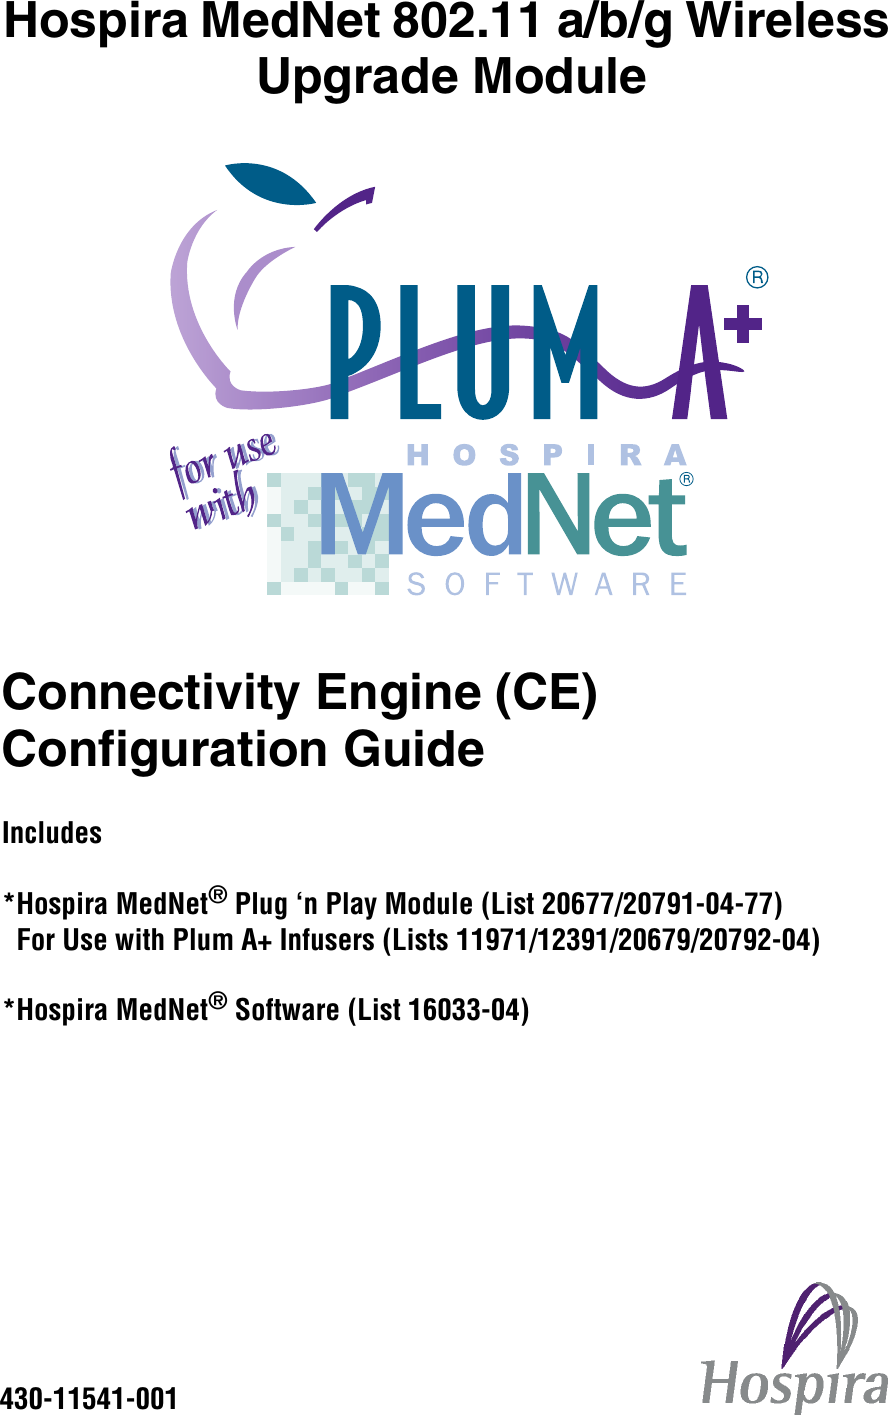 Hospira MedNet 802.11 a/b/g Wireless Upgrade ModuleConnectivity Engine (CE) Configuration GuideIncludes*Hospira MedNet® Plug ‘n Play Module (List 20677/20791-04-77)  For Use with Plum A+ Infusers (Lists 11971/12391/20679/20792-04)*Hospira MedNet® Software (List 16033-04)430-11541-001